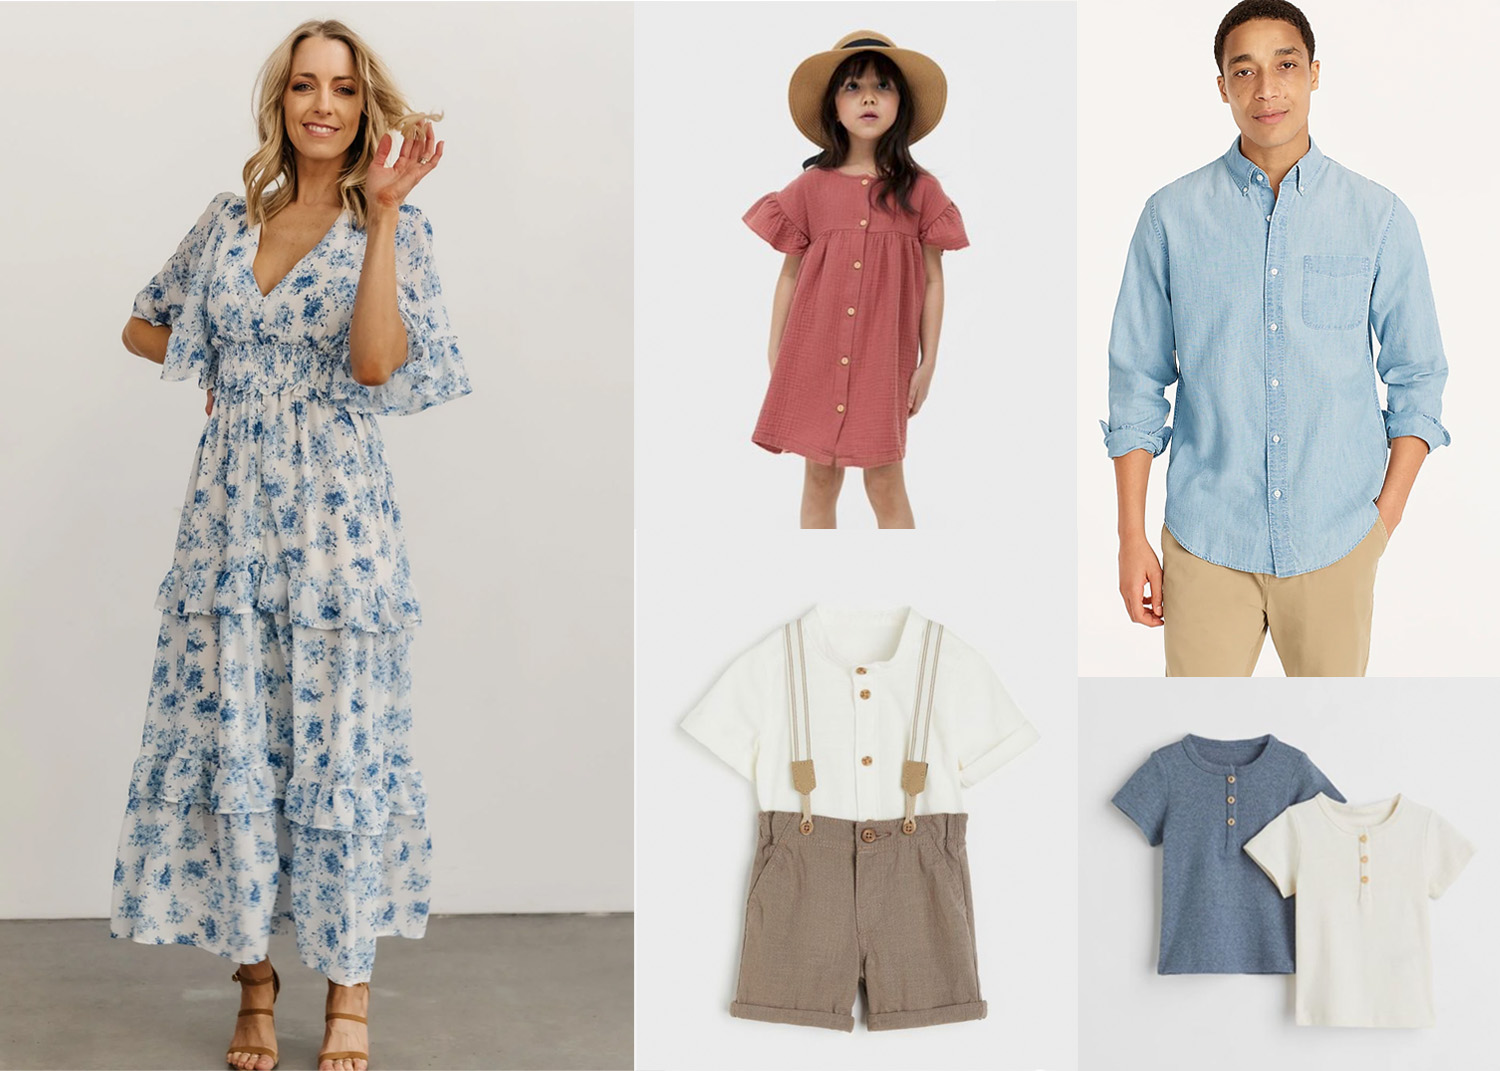 outfit selections for what to wear for upcoming family pictures